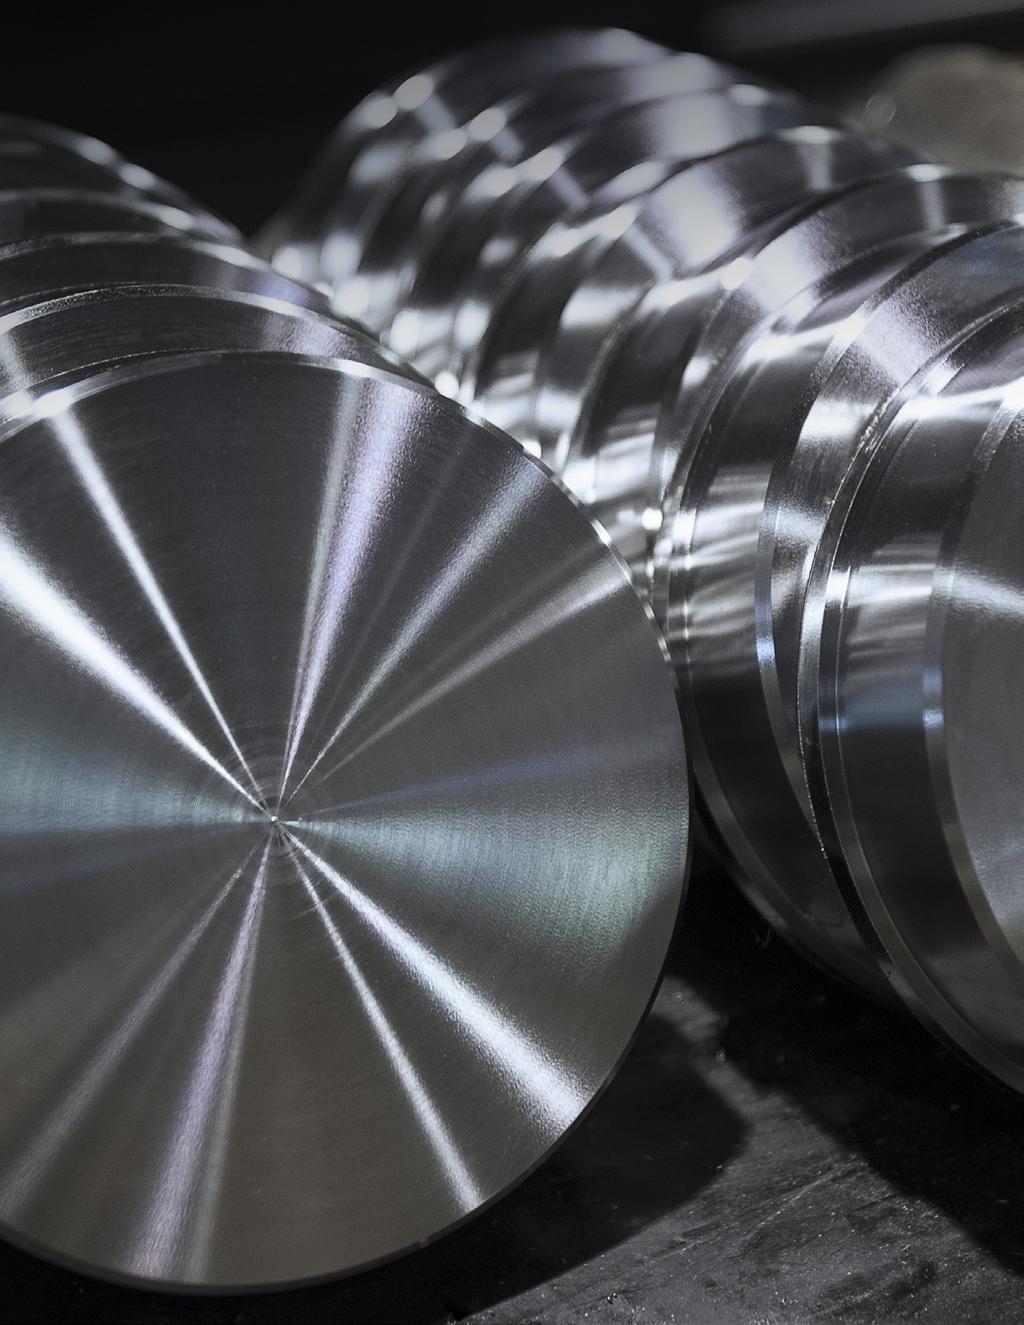 Nowadays, the combination of ultra-hard CBN inserts and superior hardened steel is making the hard turning of complex parts a cost-efficient alternative to grinding.